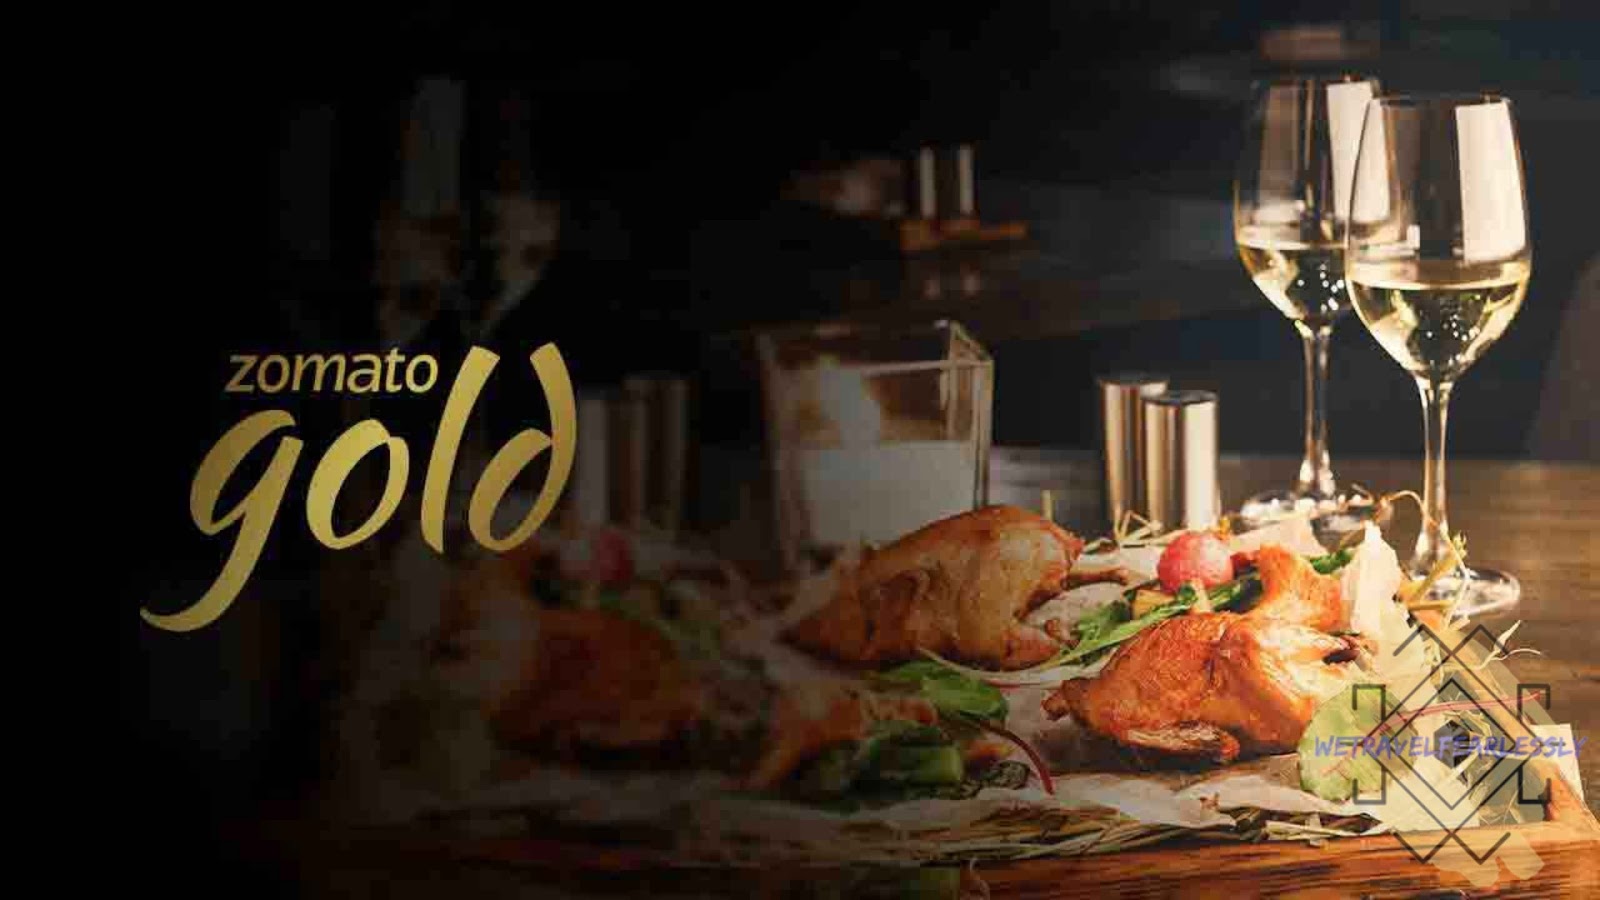 Zomato Gold - The Future of Dining Out ~ WeTravelFearlessly